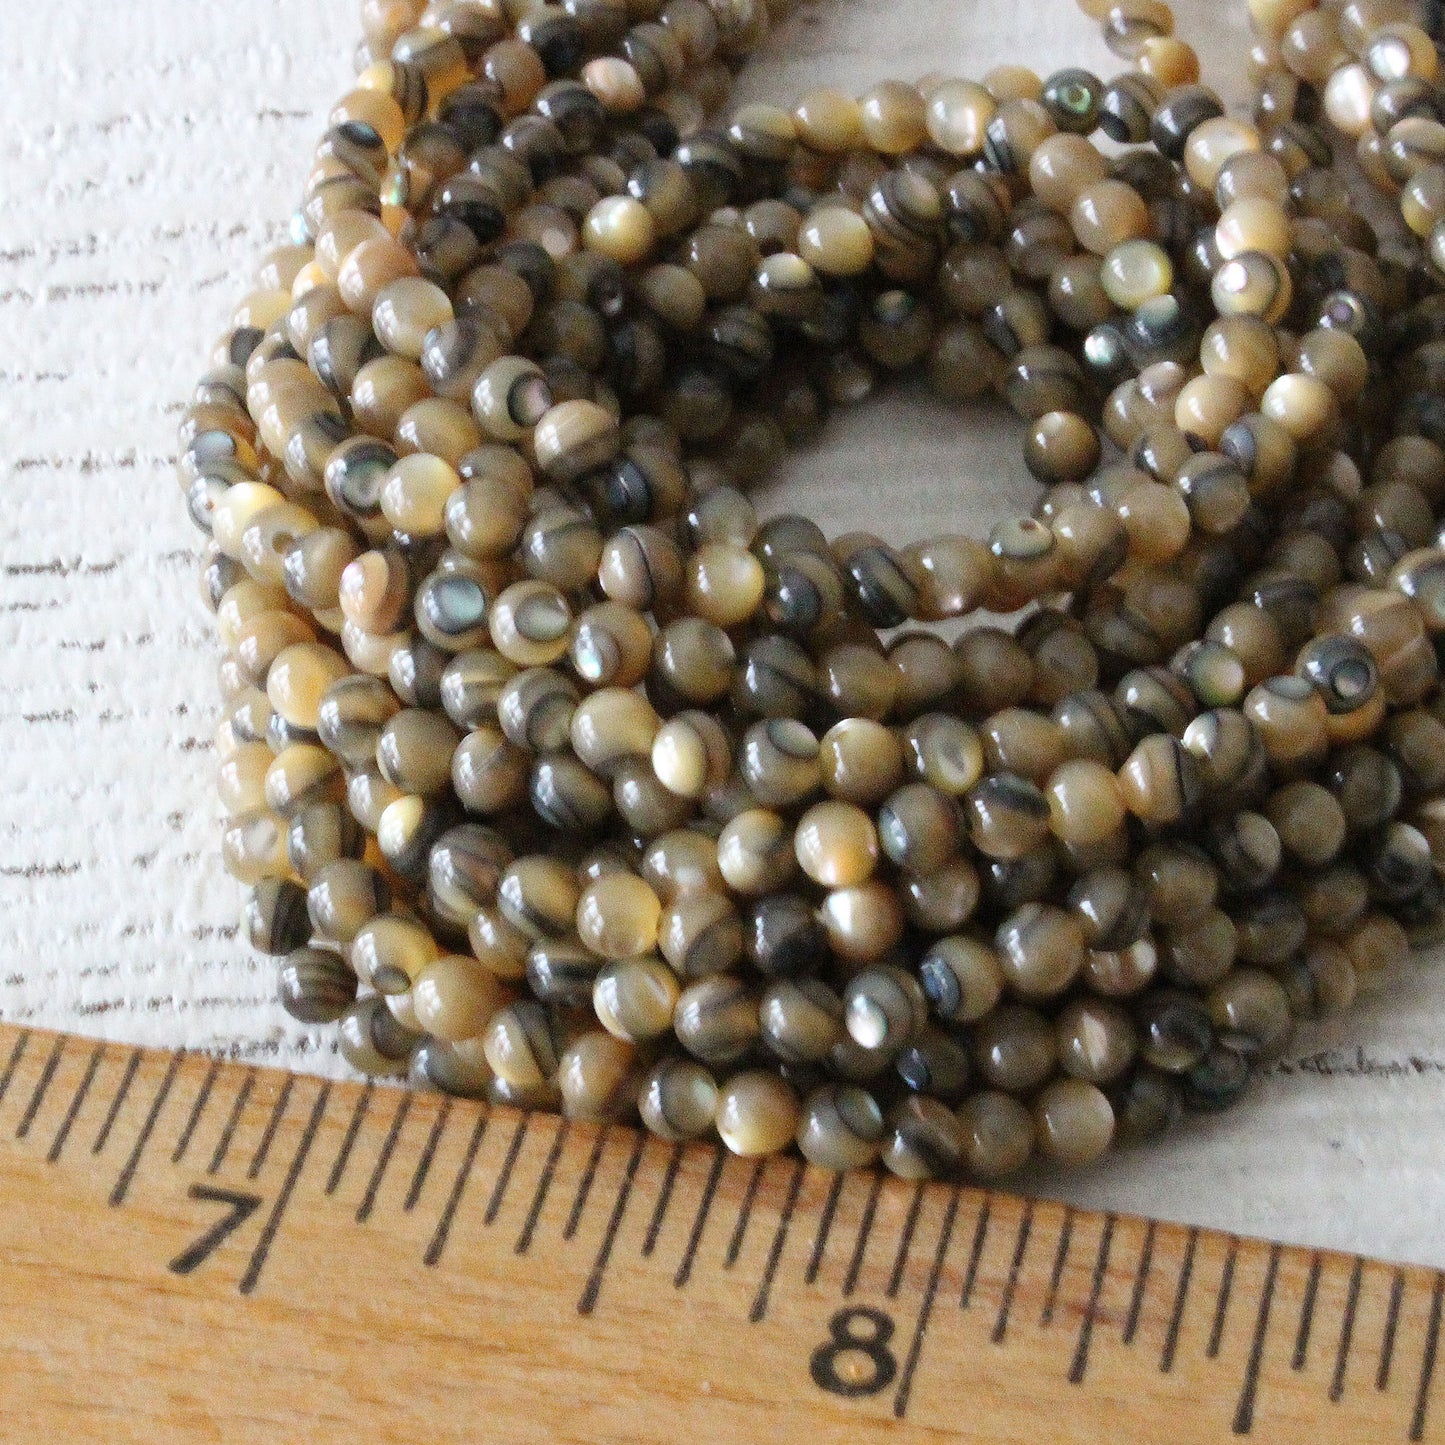 3mm Round Abalone Beads - 8 inches